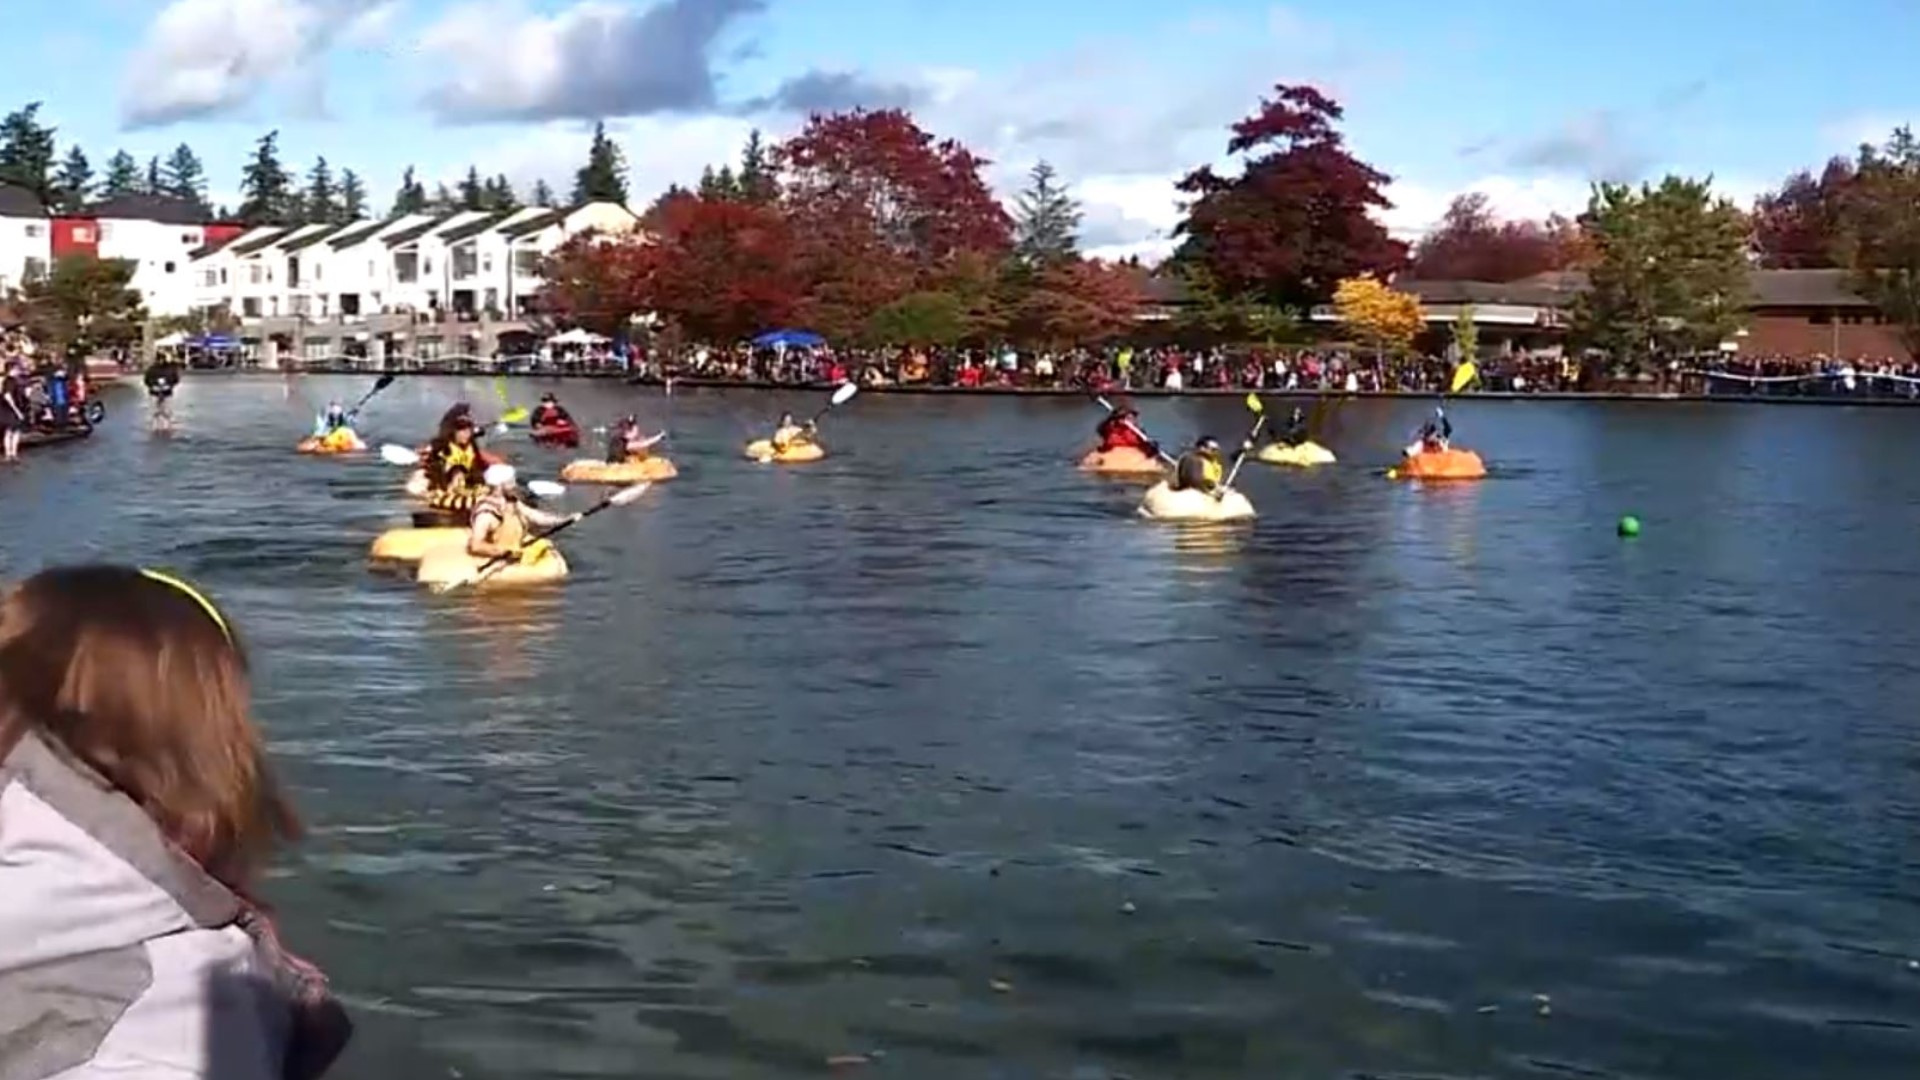 Hollowed out pumpkins used as canoes in the great pumpkin regattat in Tualatin, Oregon.